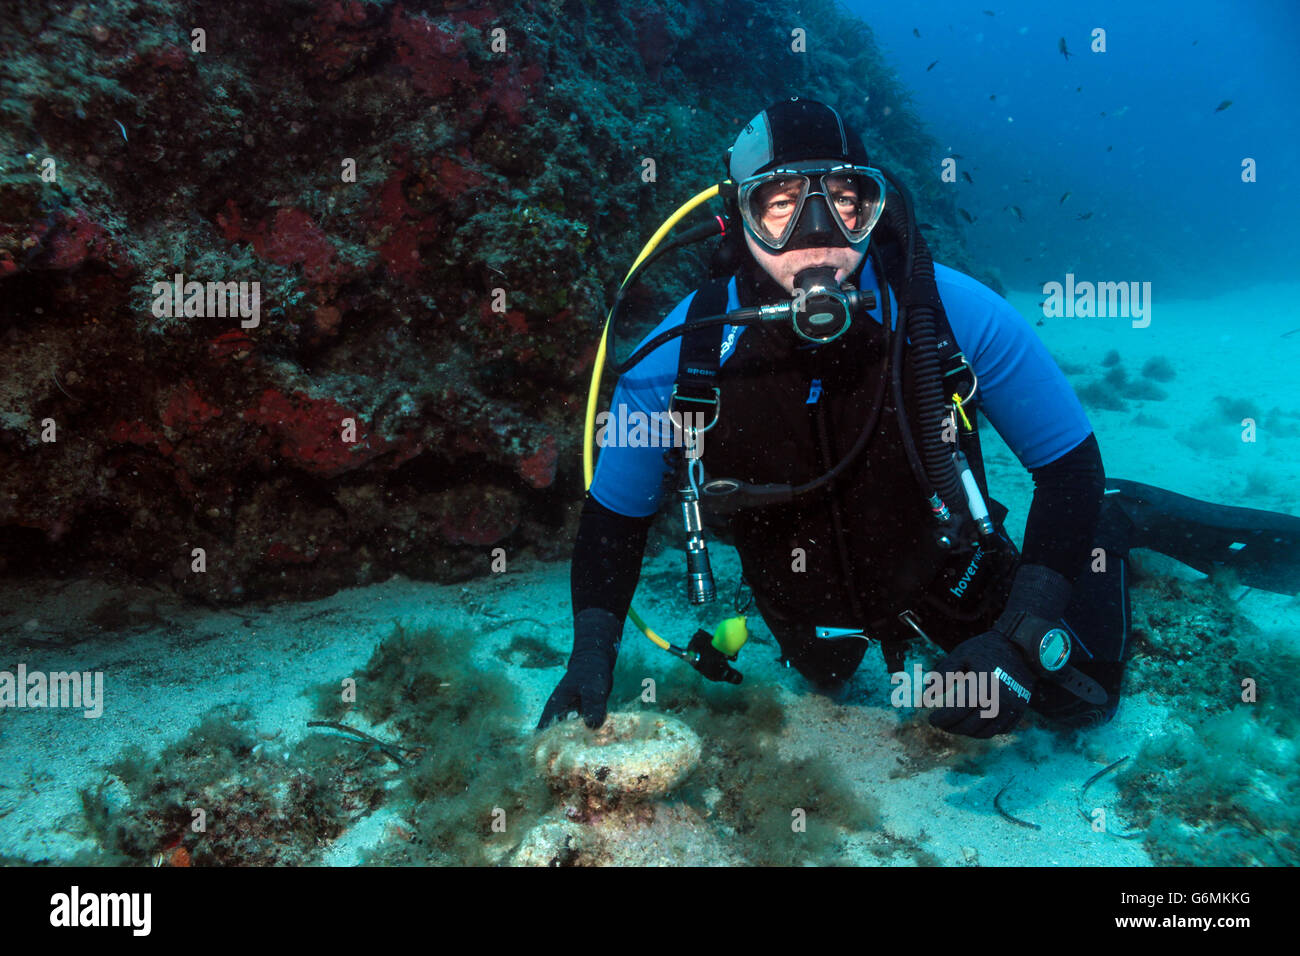 Diver and amphora Stock Photo